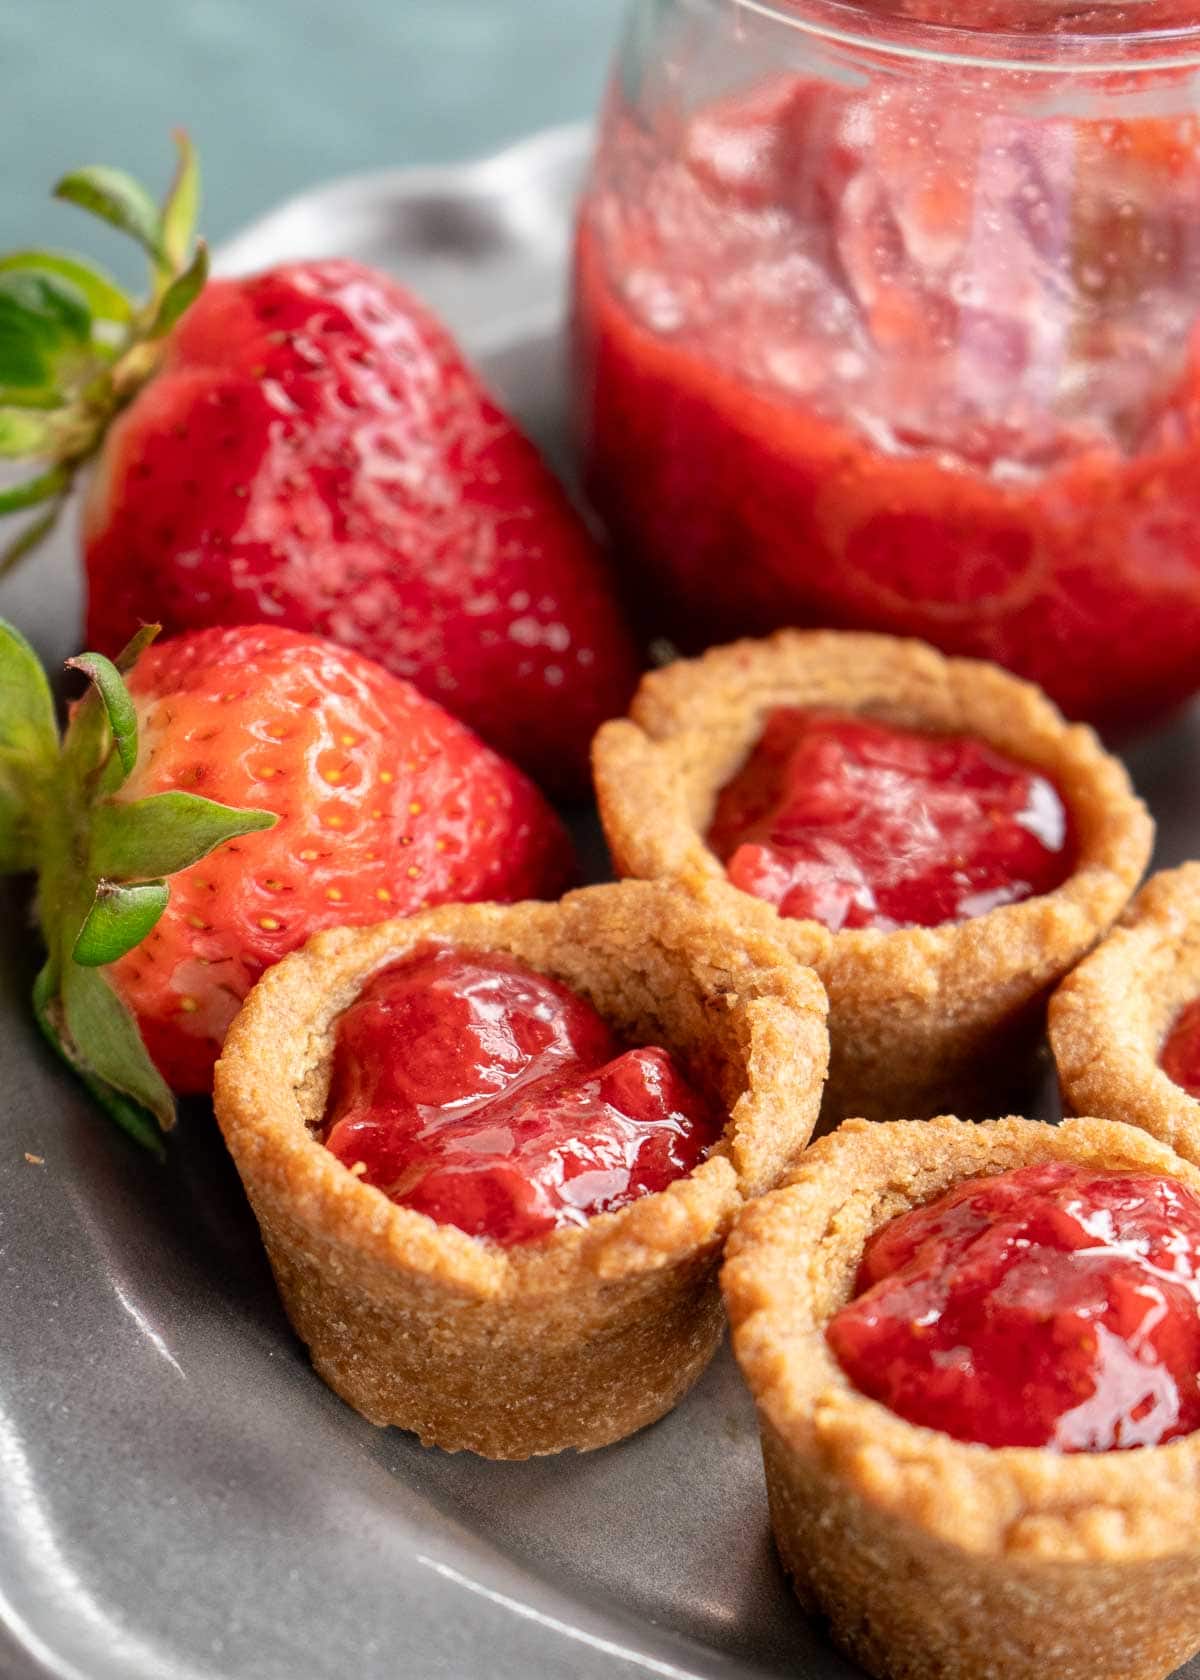 strawberries, sugar-free strawberry sauce, and peanut butter and jelly cookie cups on a plate